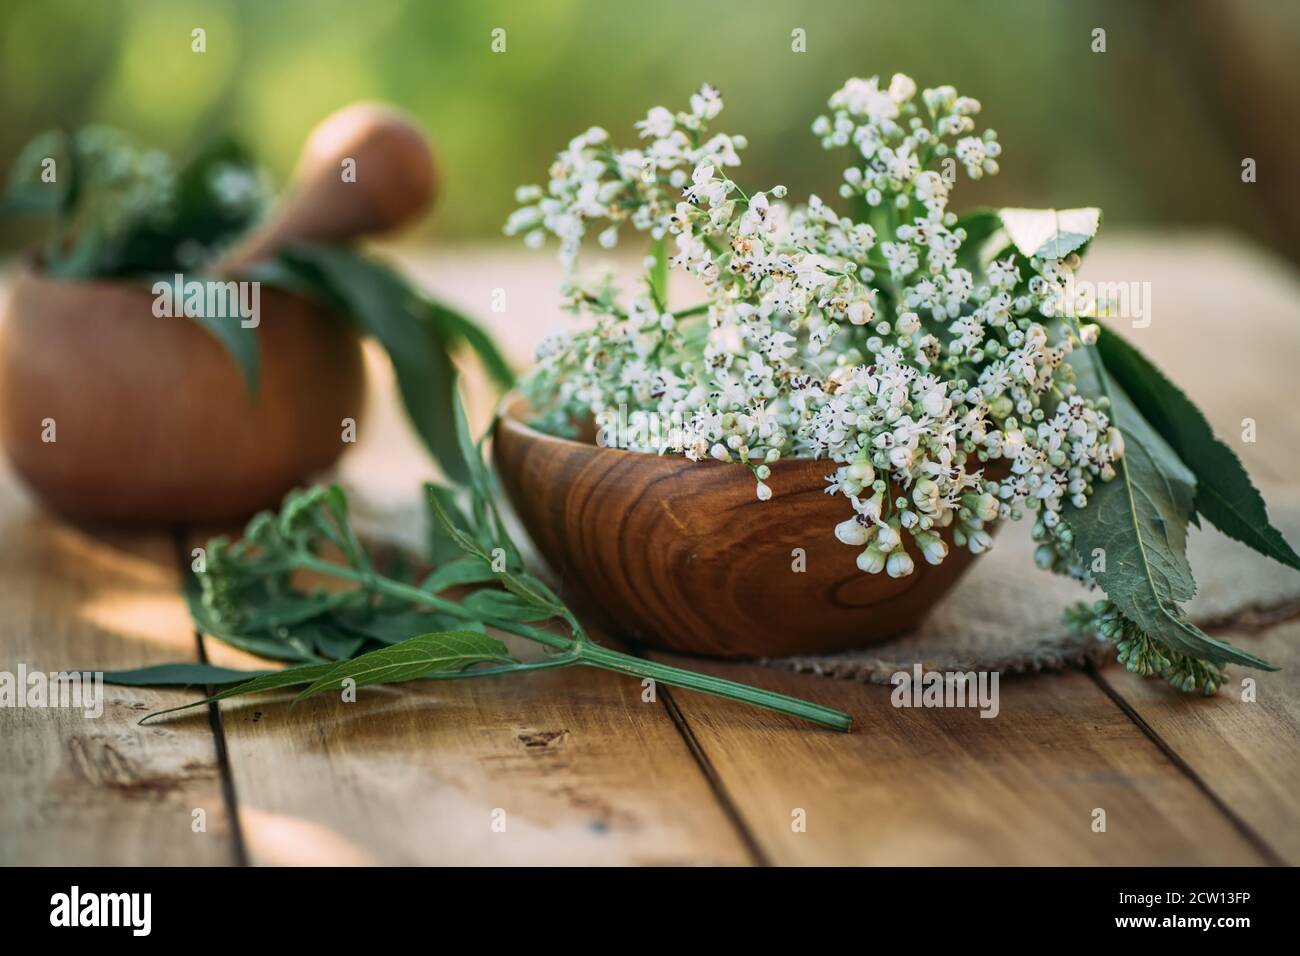 Fresh valerian flowers in wooden plate on table. mortar with prepared potion of valerian root. use of medicinal plants in traditional medicine. Stock Photo